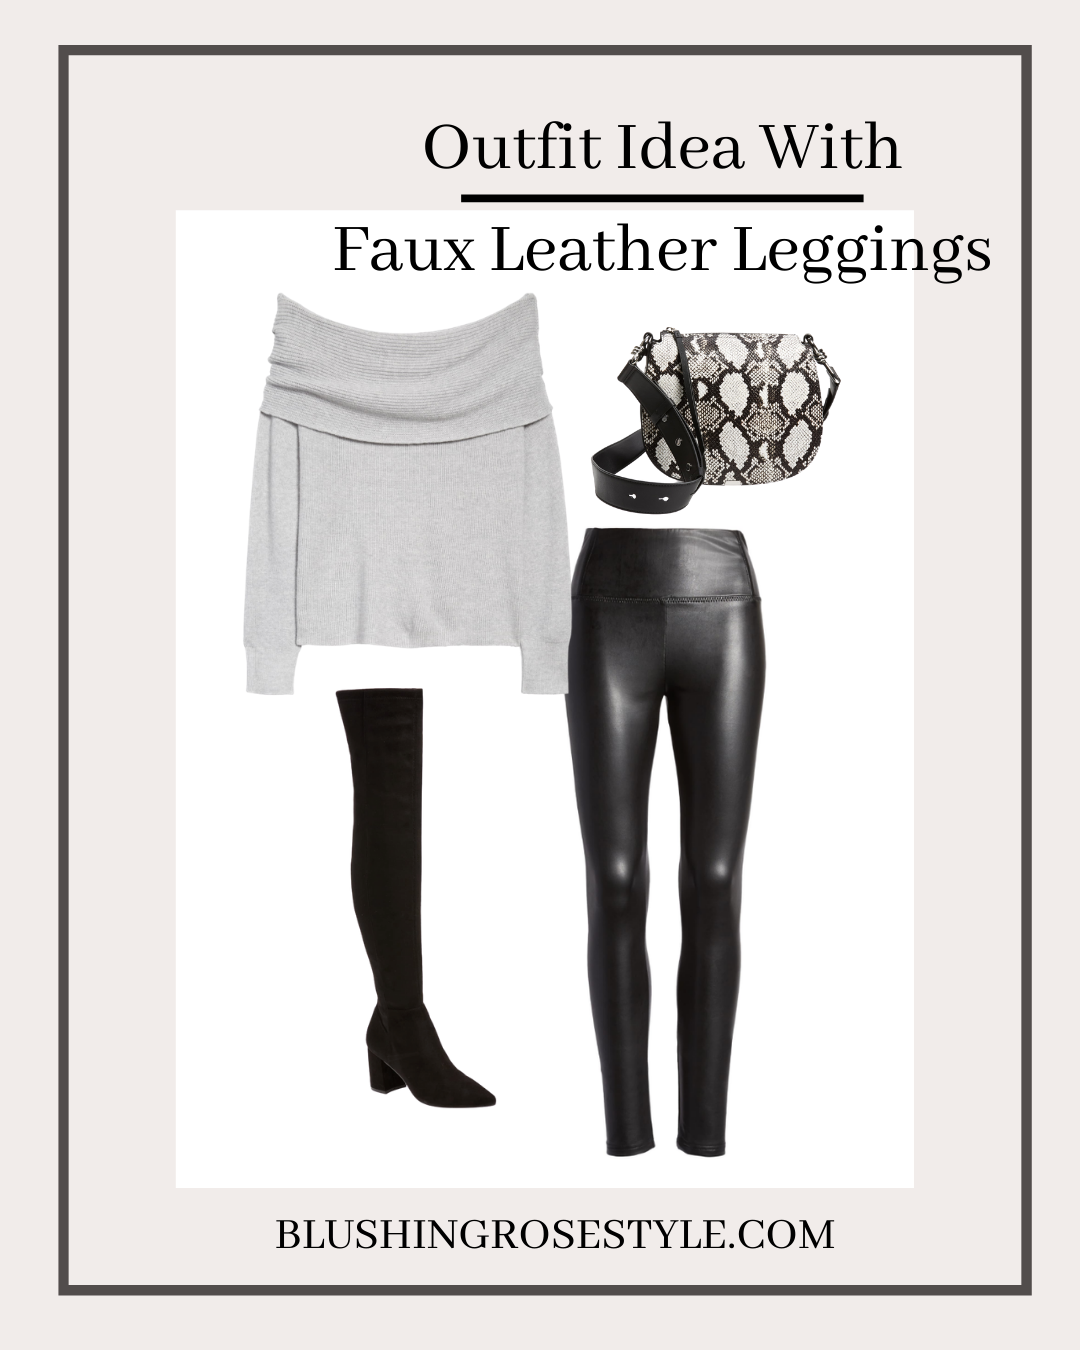 OUTFIT IDEA WITH FAUX LEATHER LEGGINGS